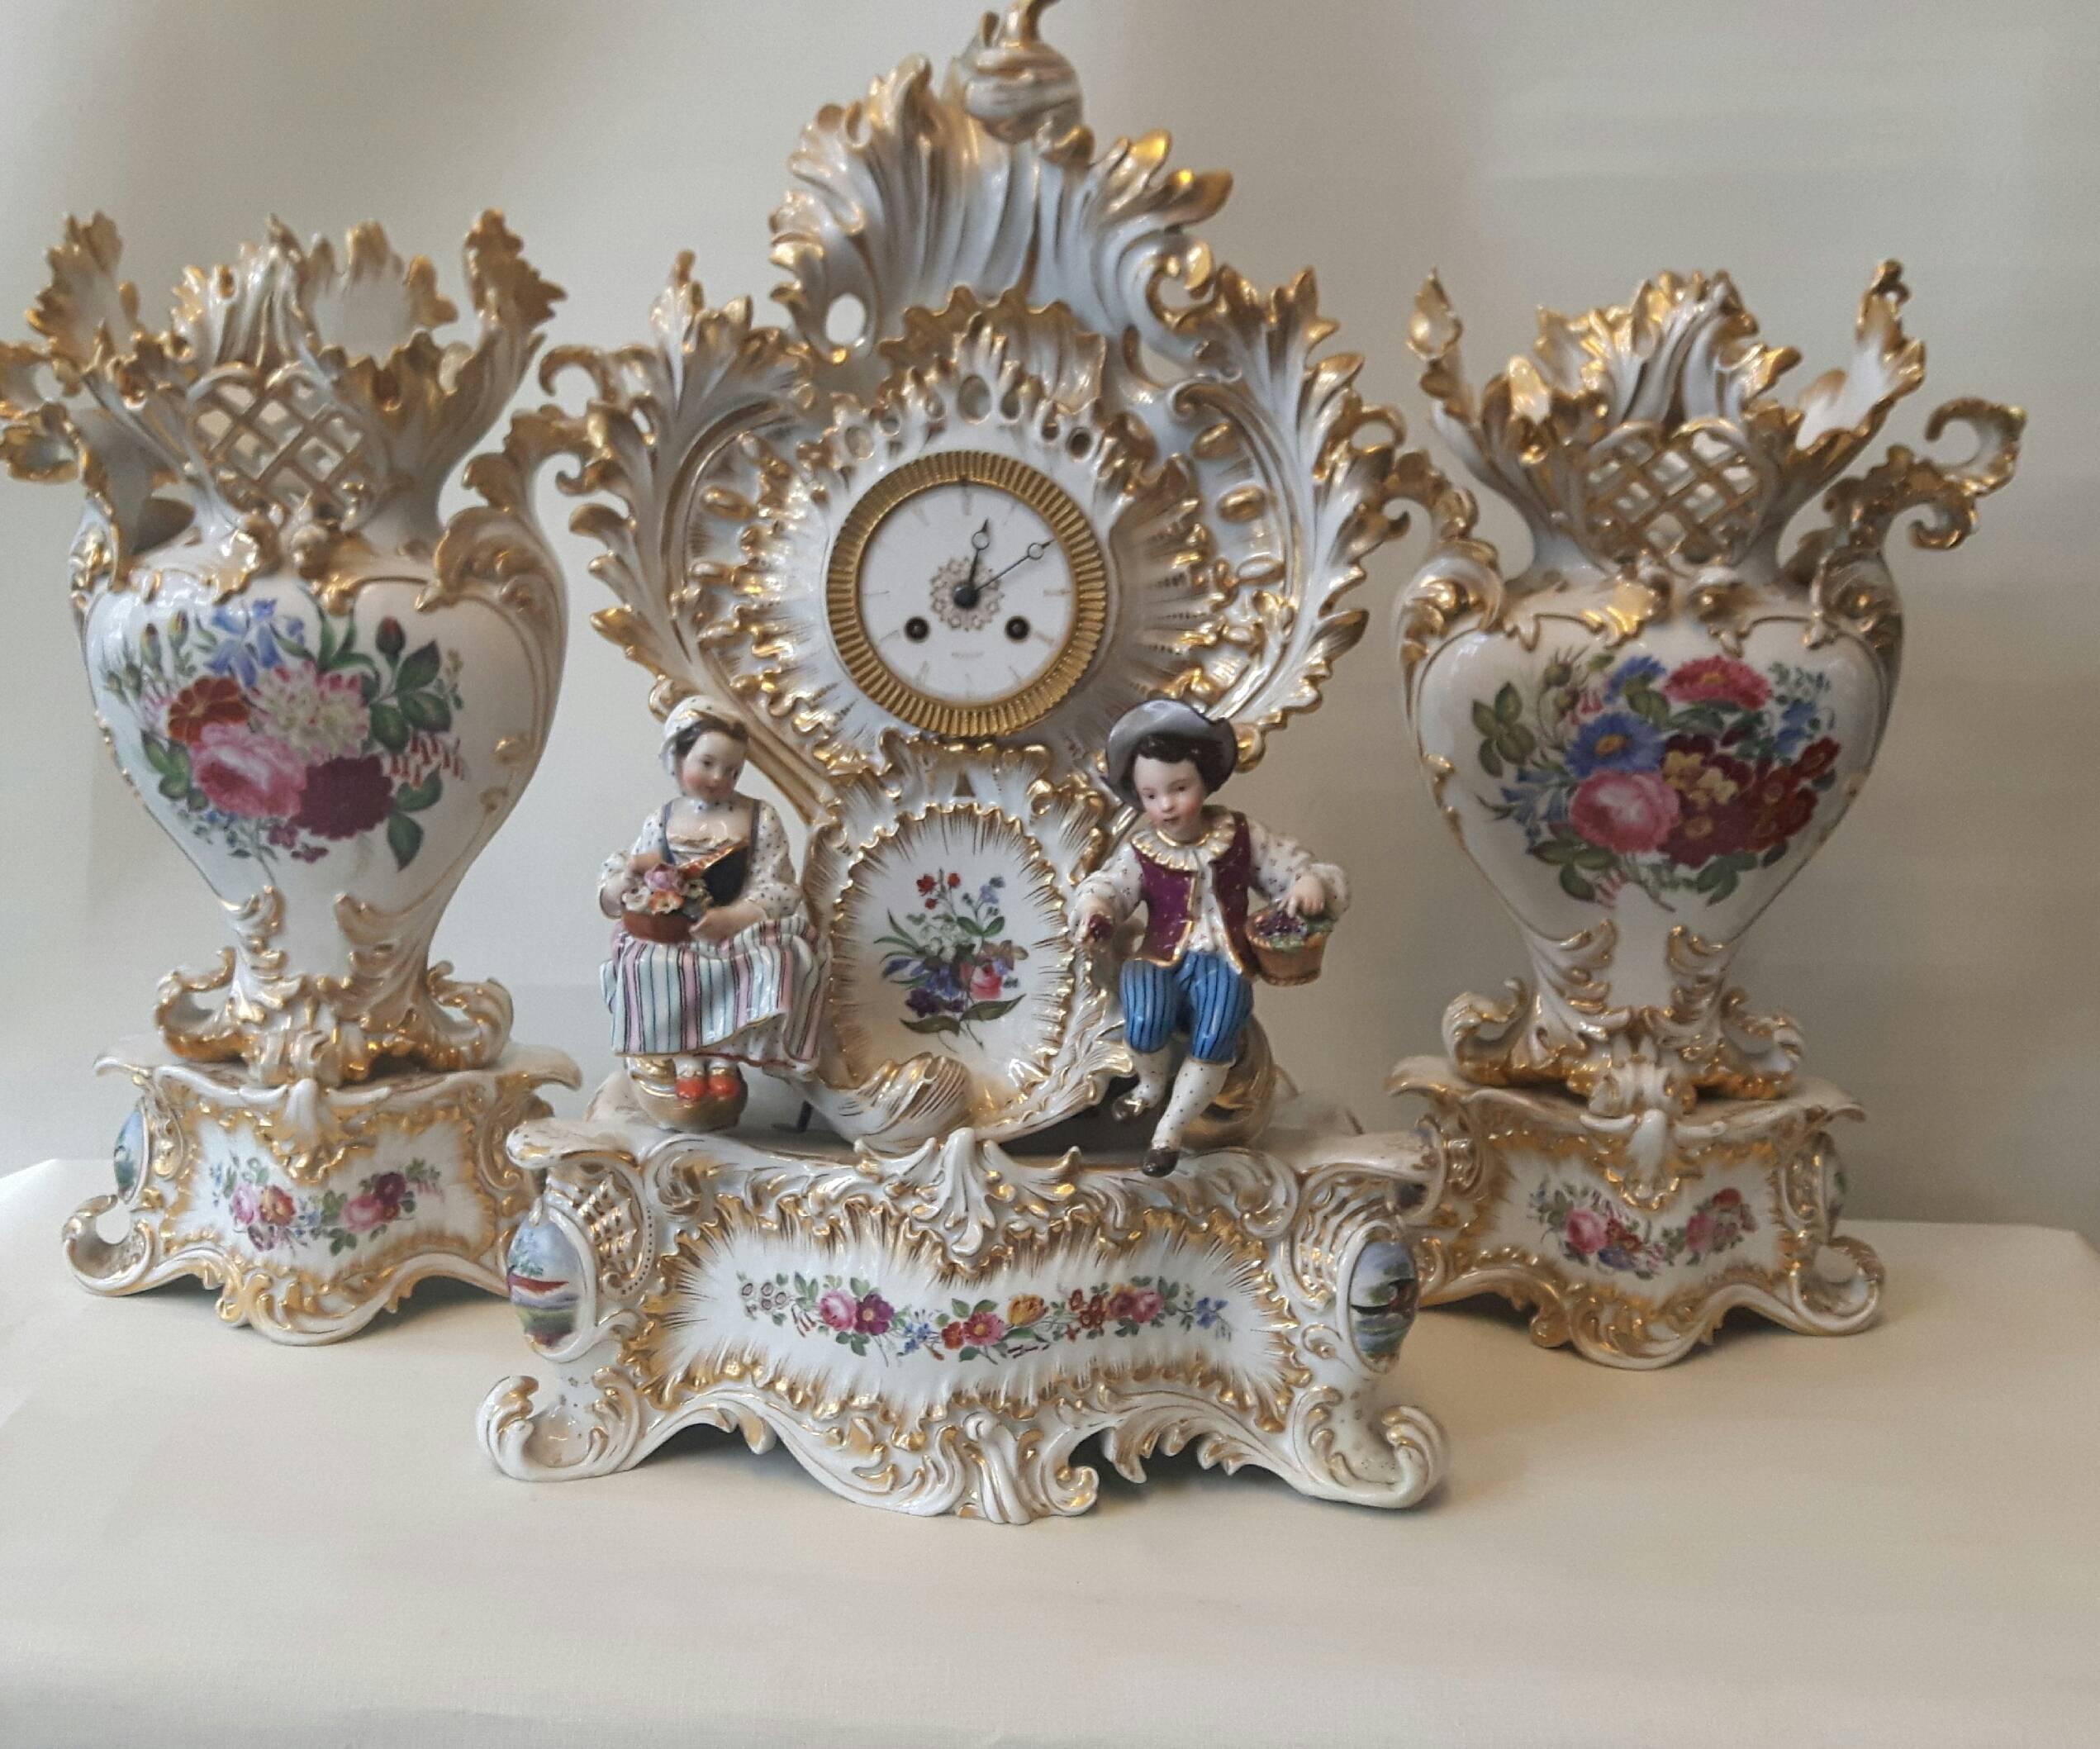 An elegant Rococo garniture by Jacob Petit, Paris, circa 1860. The clock is elaborately hand-painted with flower cartouches, as are the matching vases and a pair of Meissen style figurines, depicting gardners adorn the foot of the clock. The clock